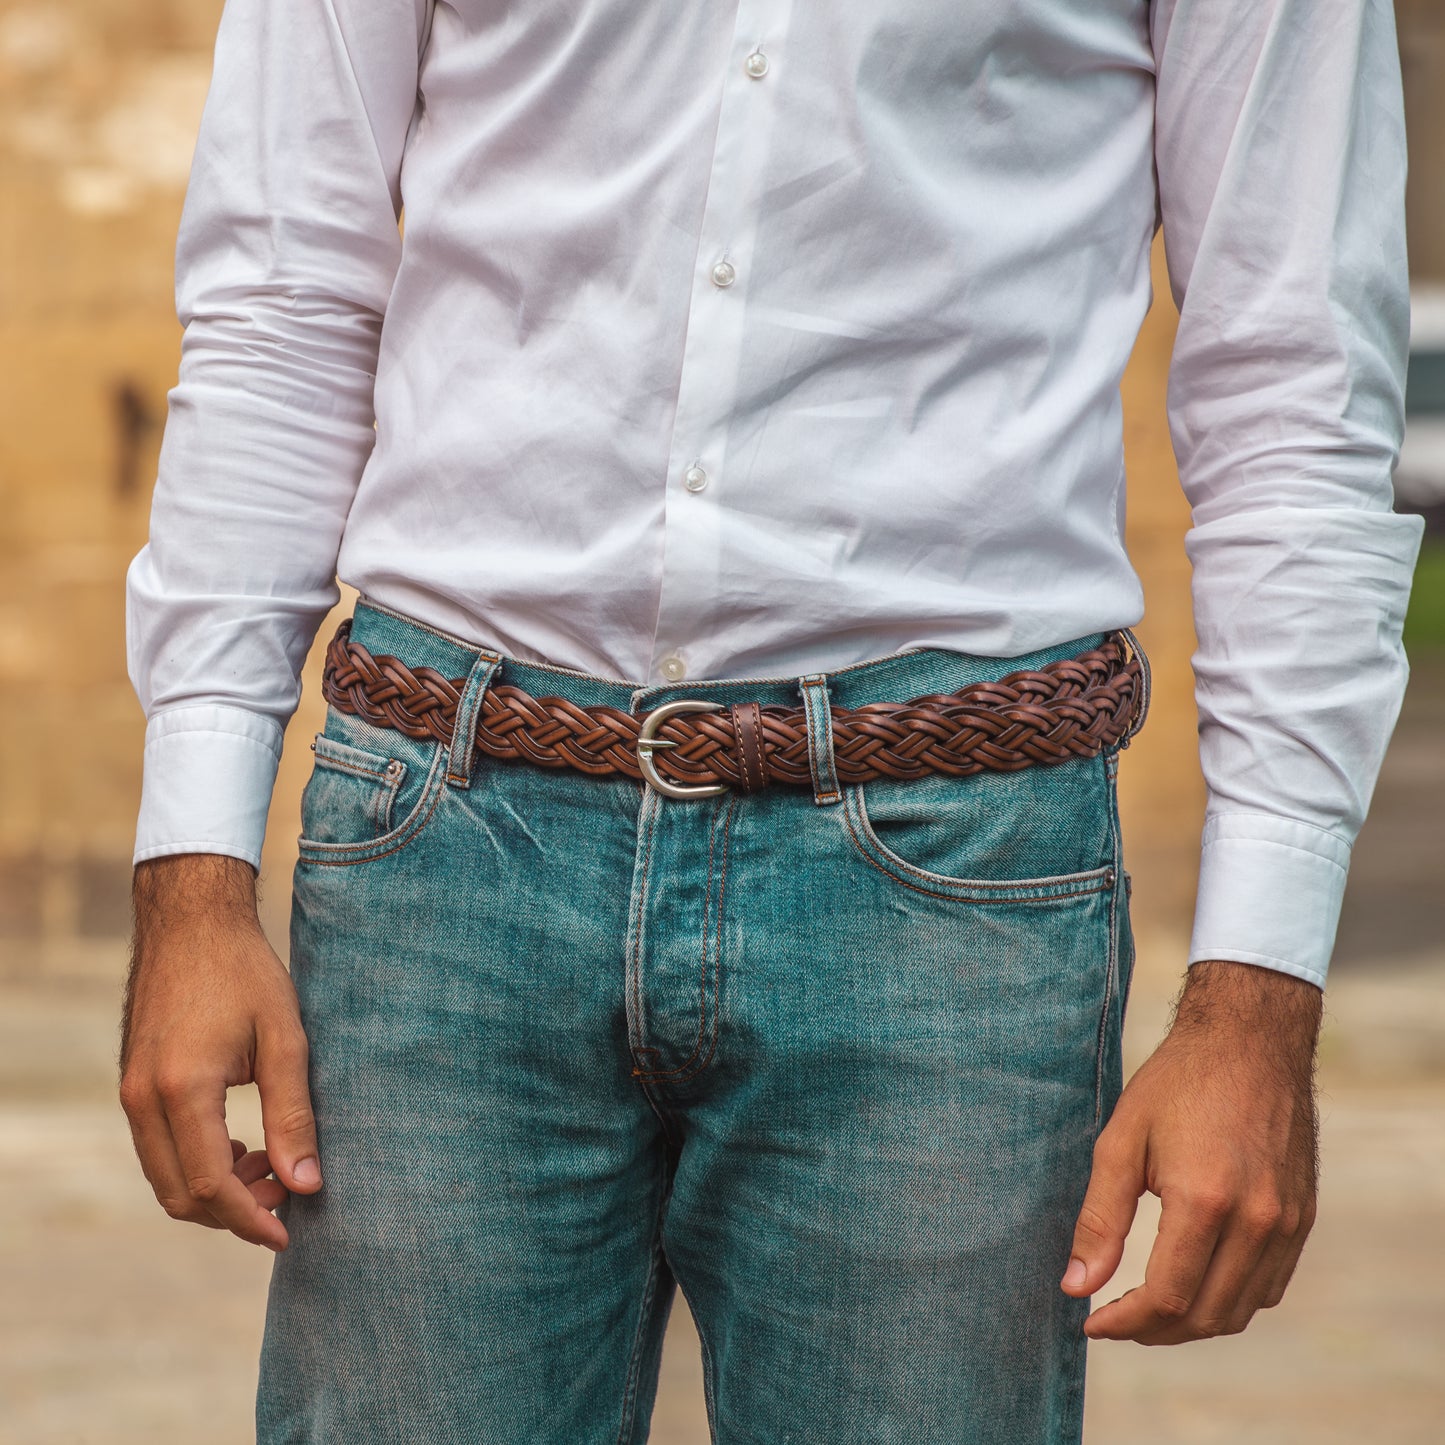 Hand-woven vegetable leather belt with handcrafted buckle - Dalia